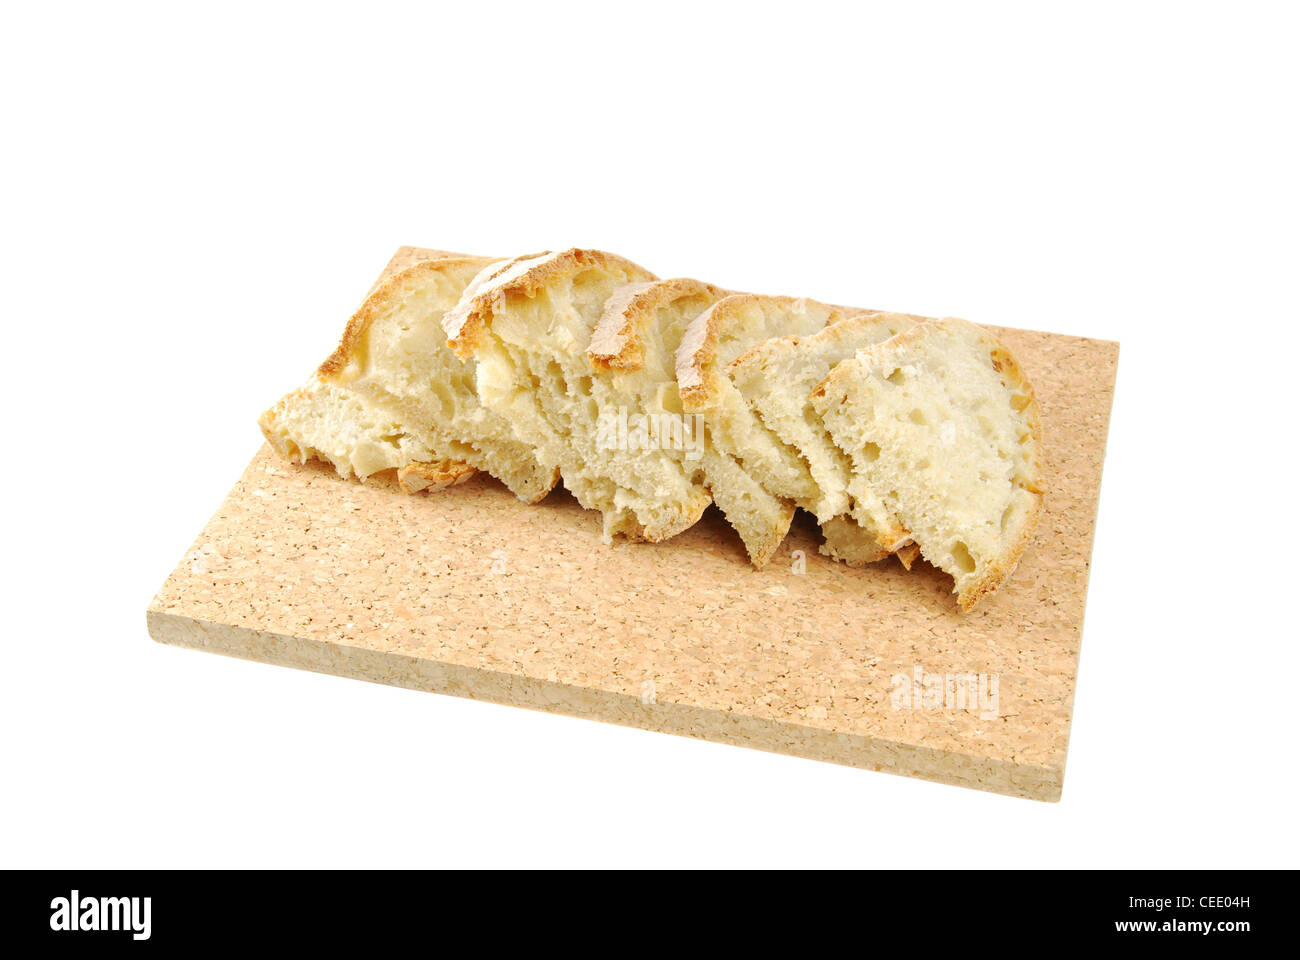 slices of cantle wheaten bread on a cork tray (isolated on white background) Stock Photo